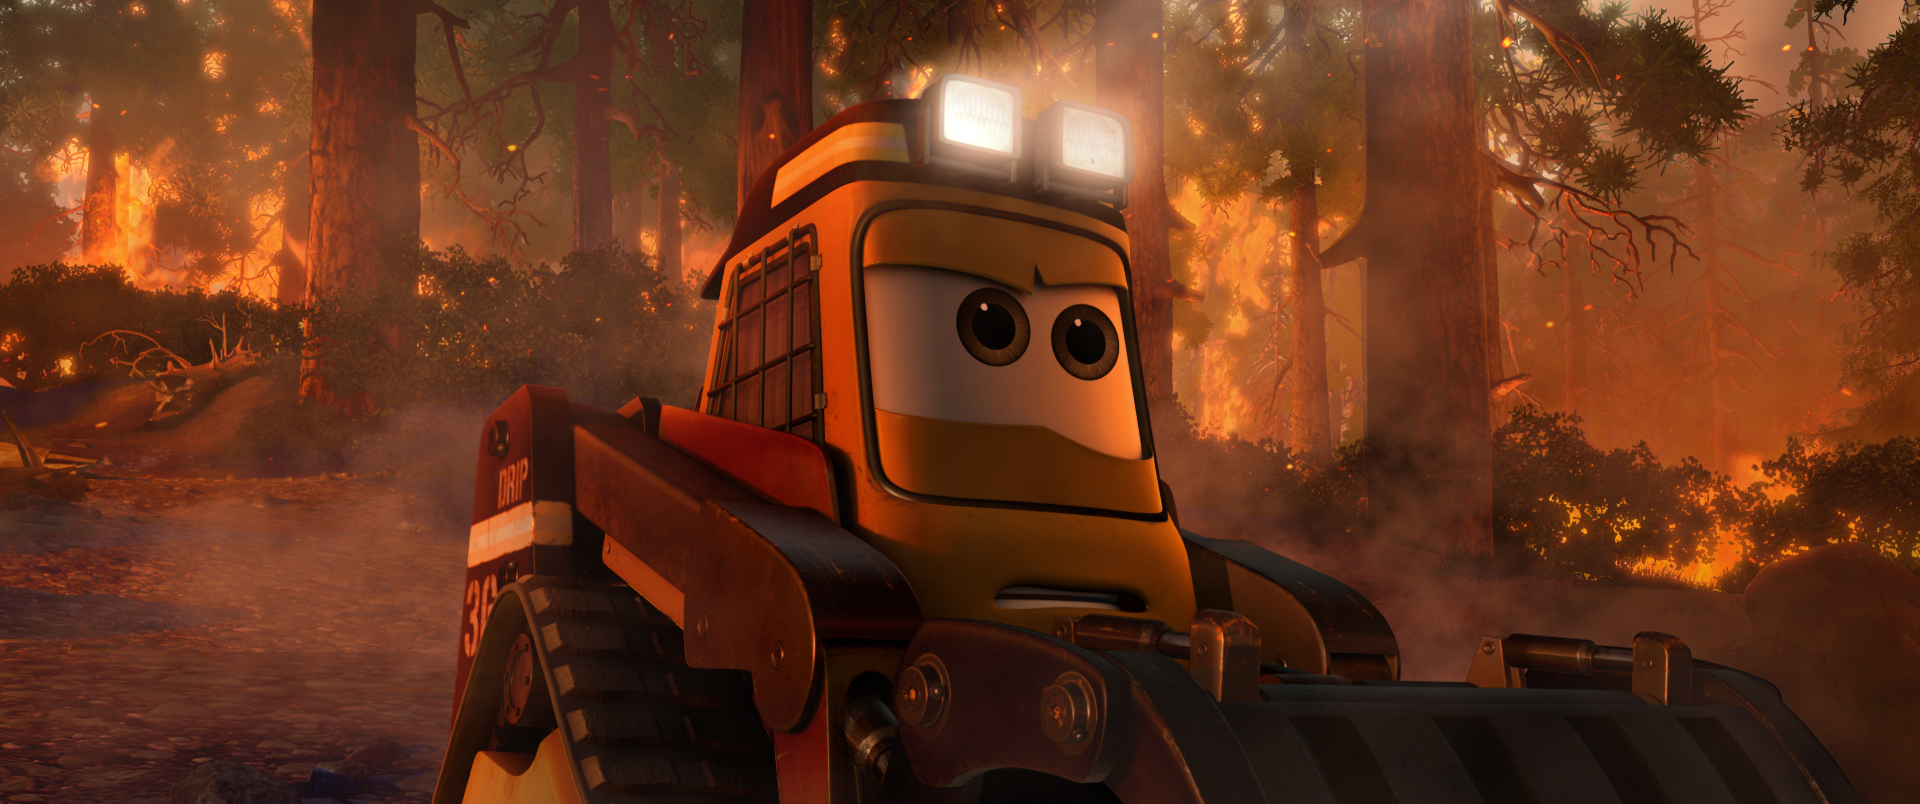 Planes Fire and Rescue